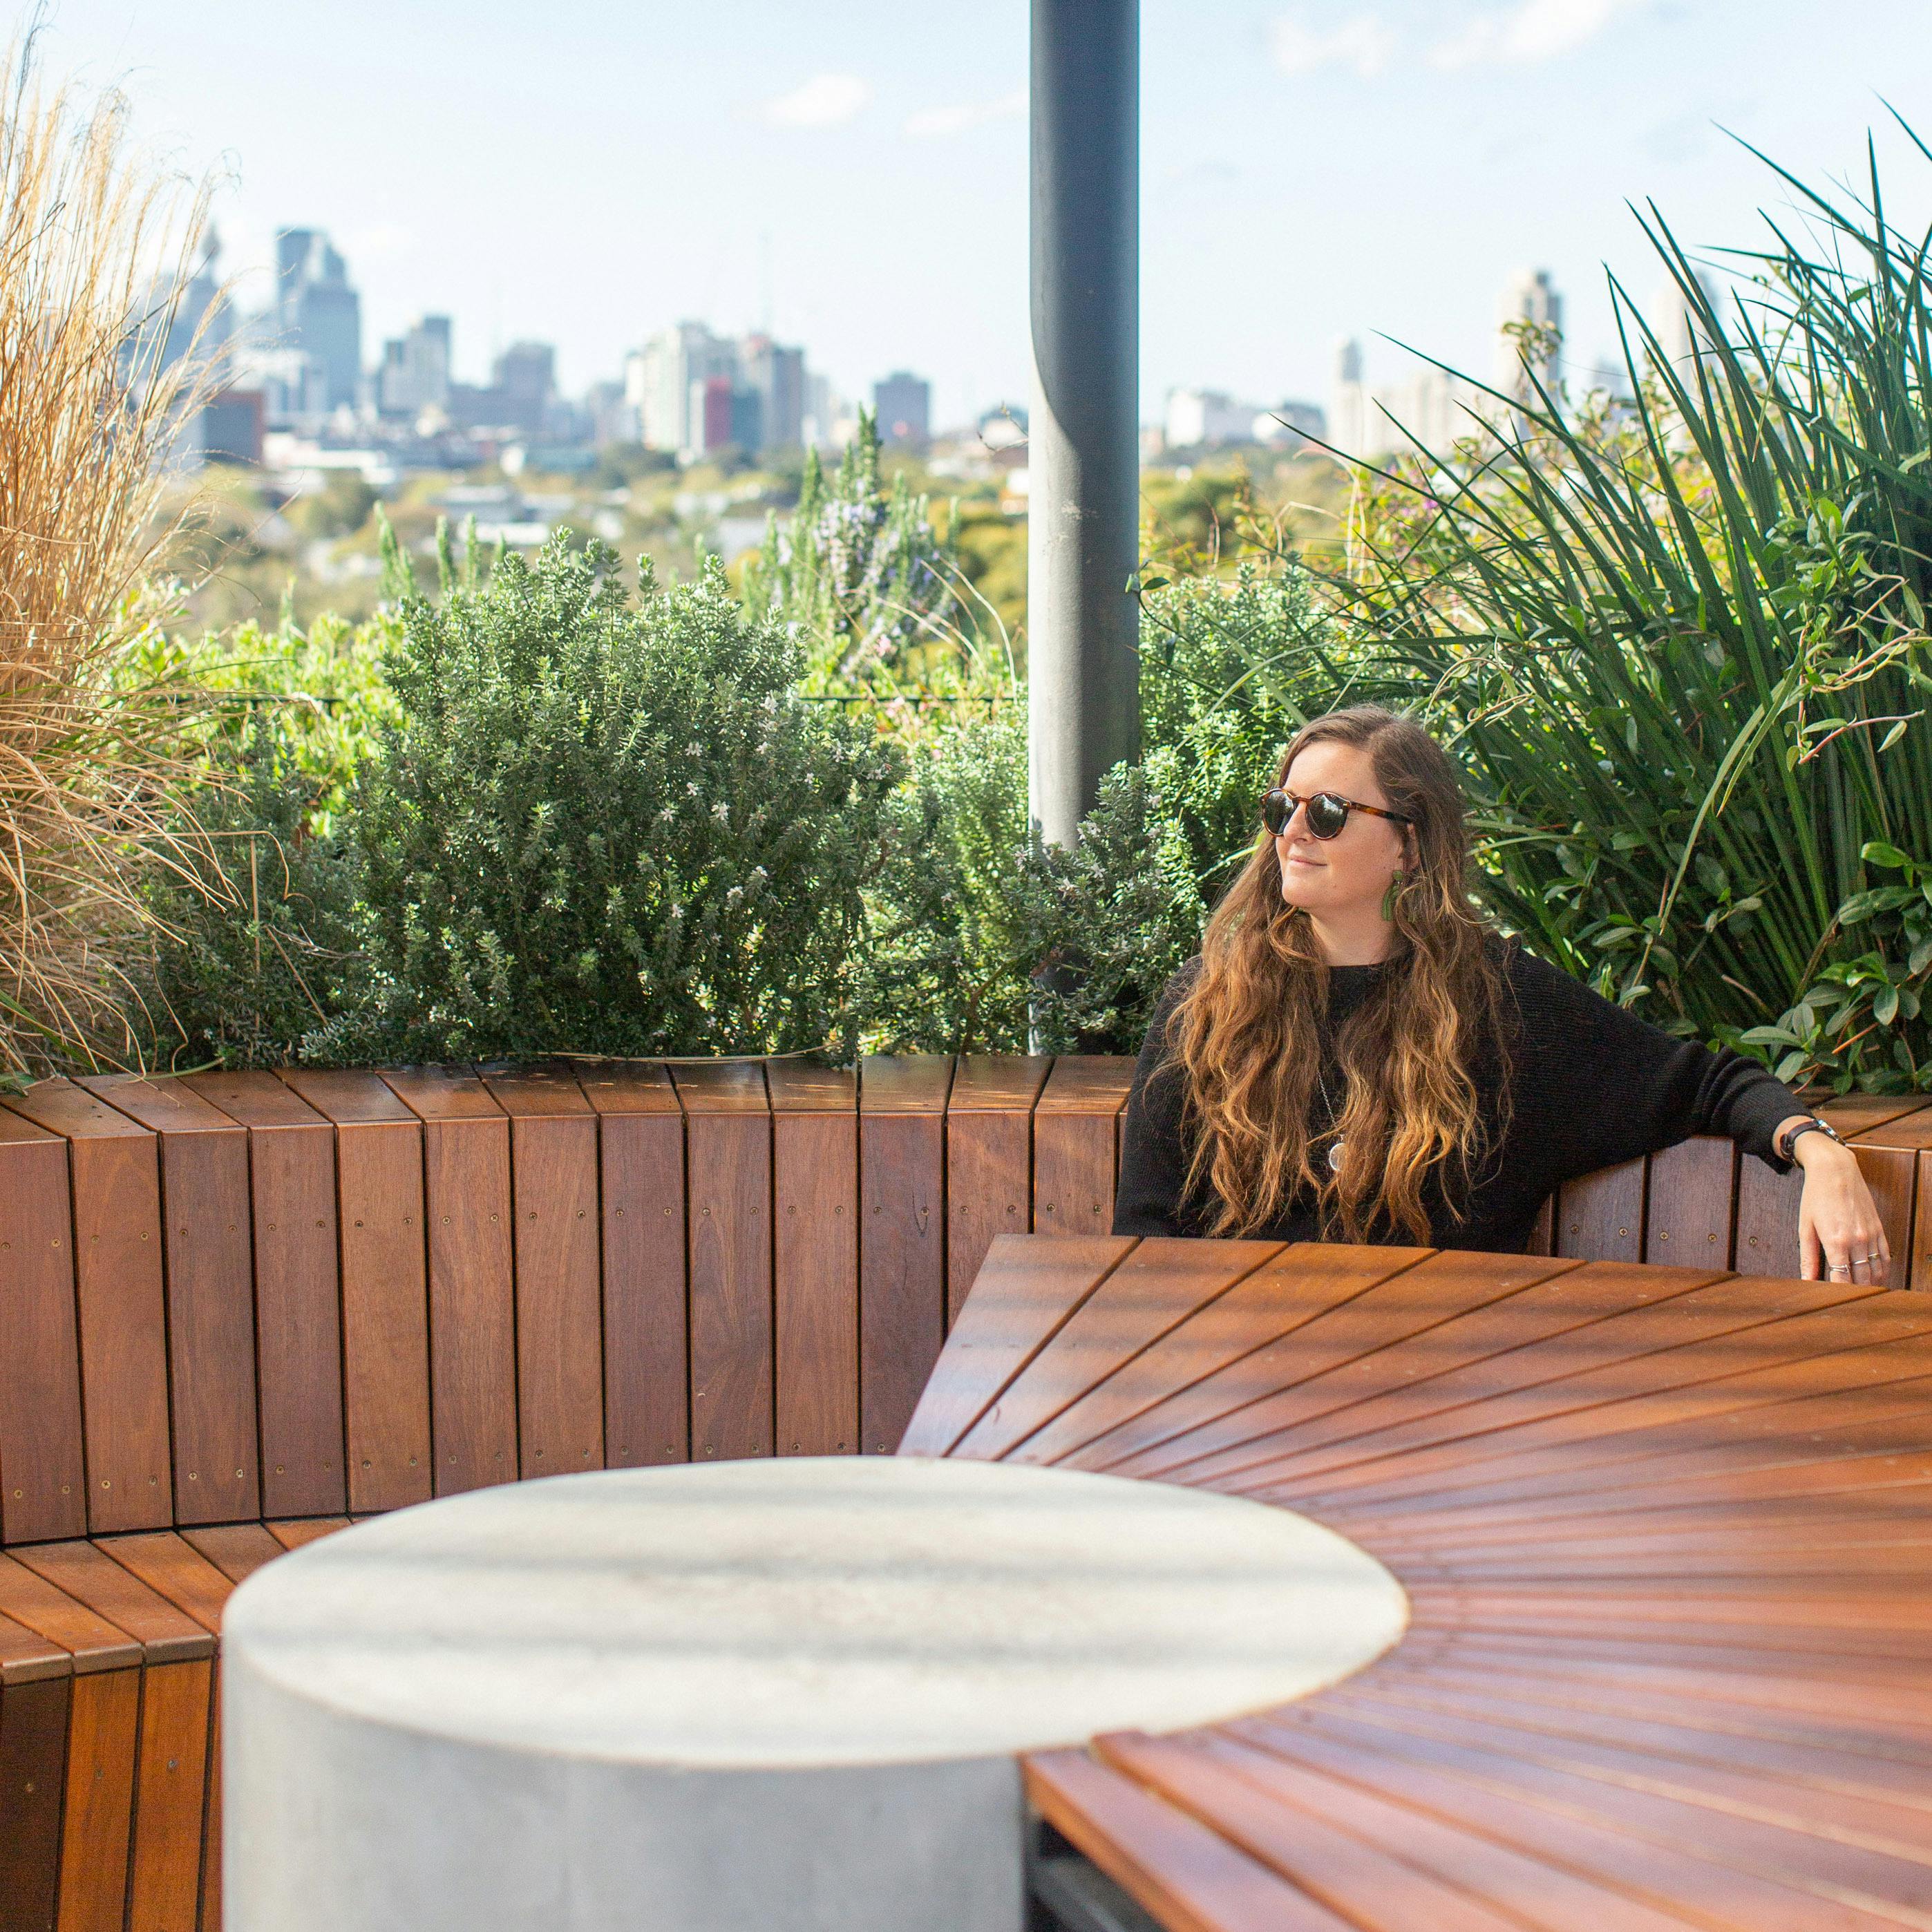 A photograph of a person relaxing in a rooftop garden. They are sitting on a curved seat, at a curved table, and wearing sunglasses. Lush green planting and a glimpse of Sydney's skyline make up the background.